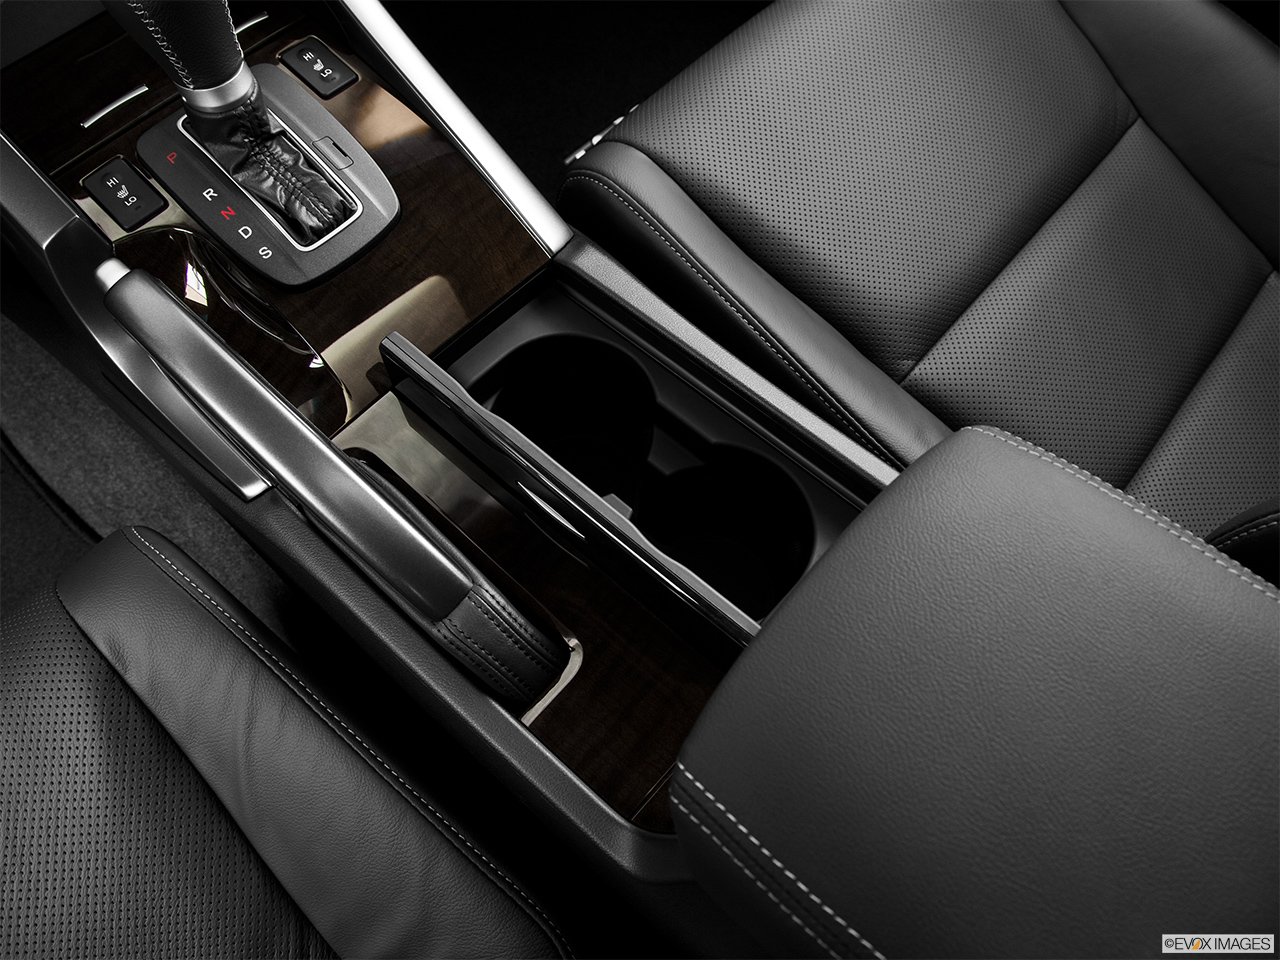 2013 Acura TSX 5-speed Automatic Cup holders. 